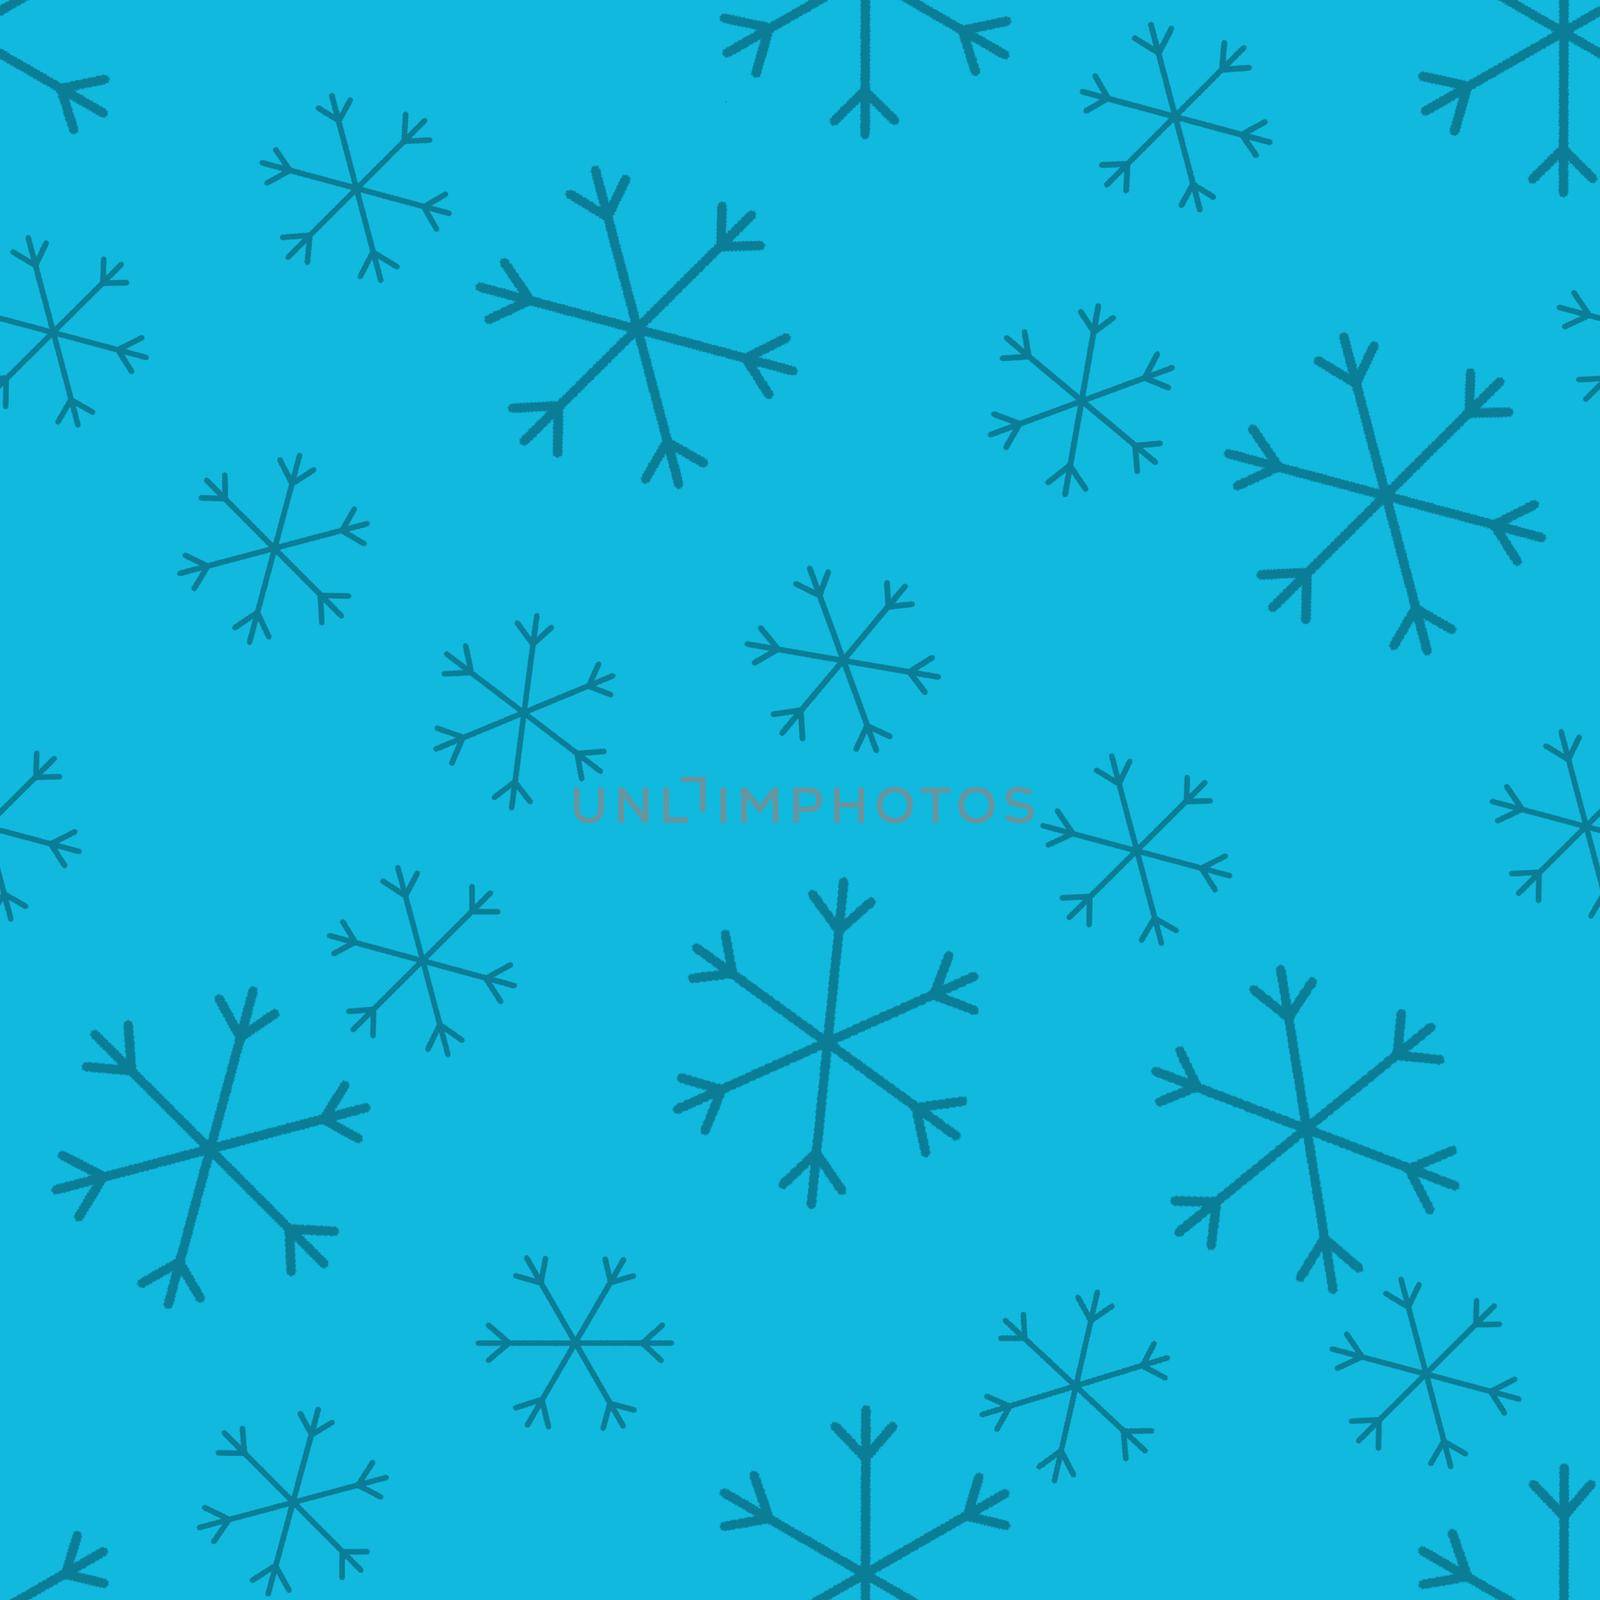 Seamless Christmas pattern doodle with hand random drawn snowflakes.Wrapping paper for presents, funny textile fabric print, design,decor, food wrap, backgrounds. new year.Raster copy.Sky blue, black by Angelsmoon